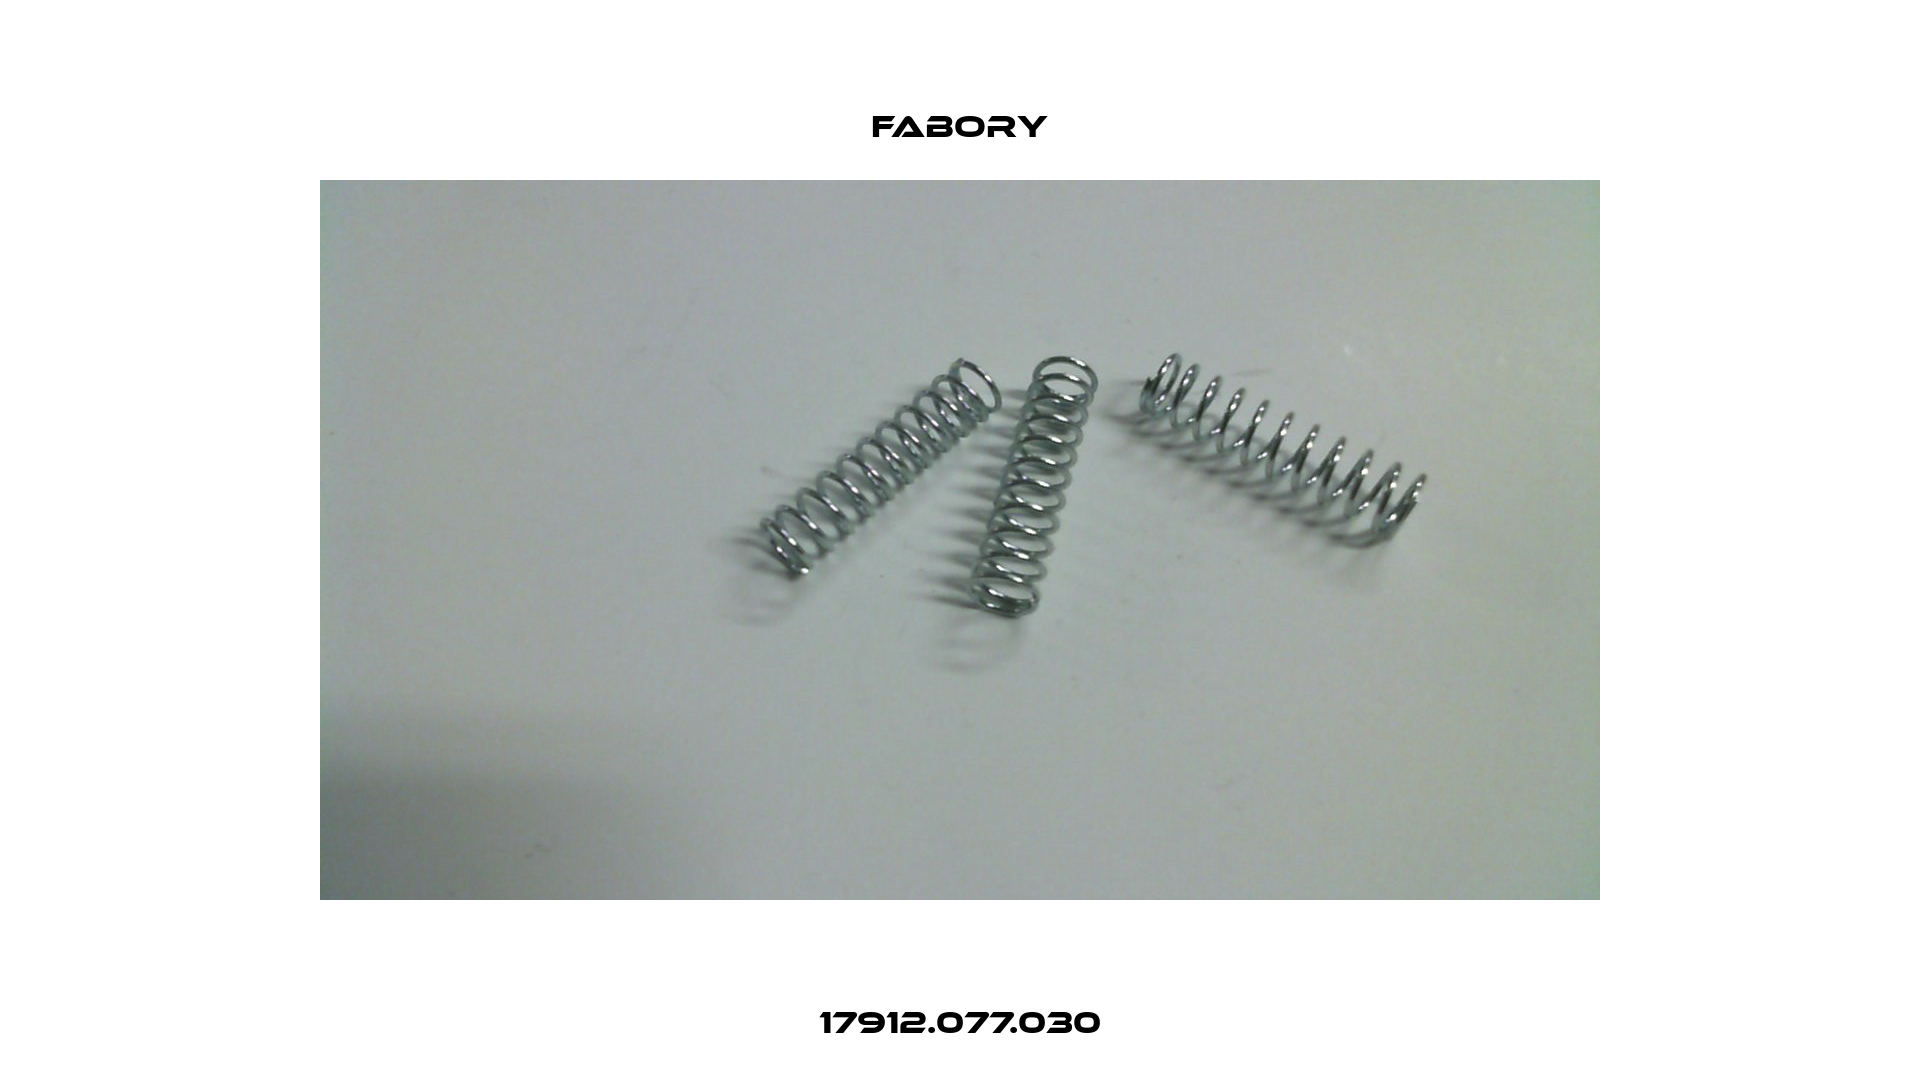 17912.077.030 Fabory